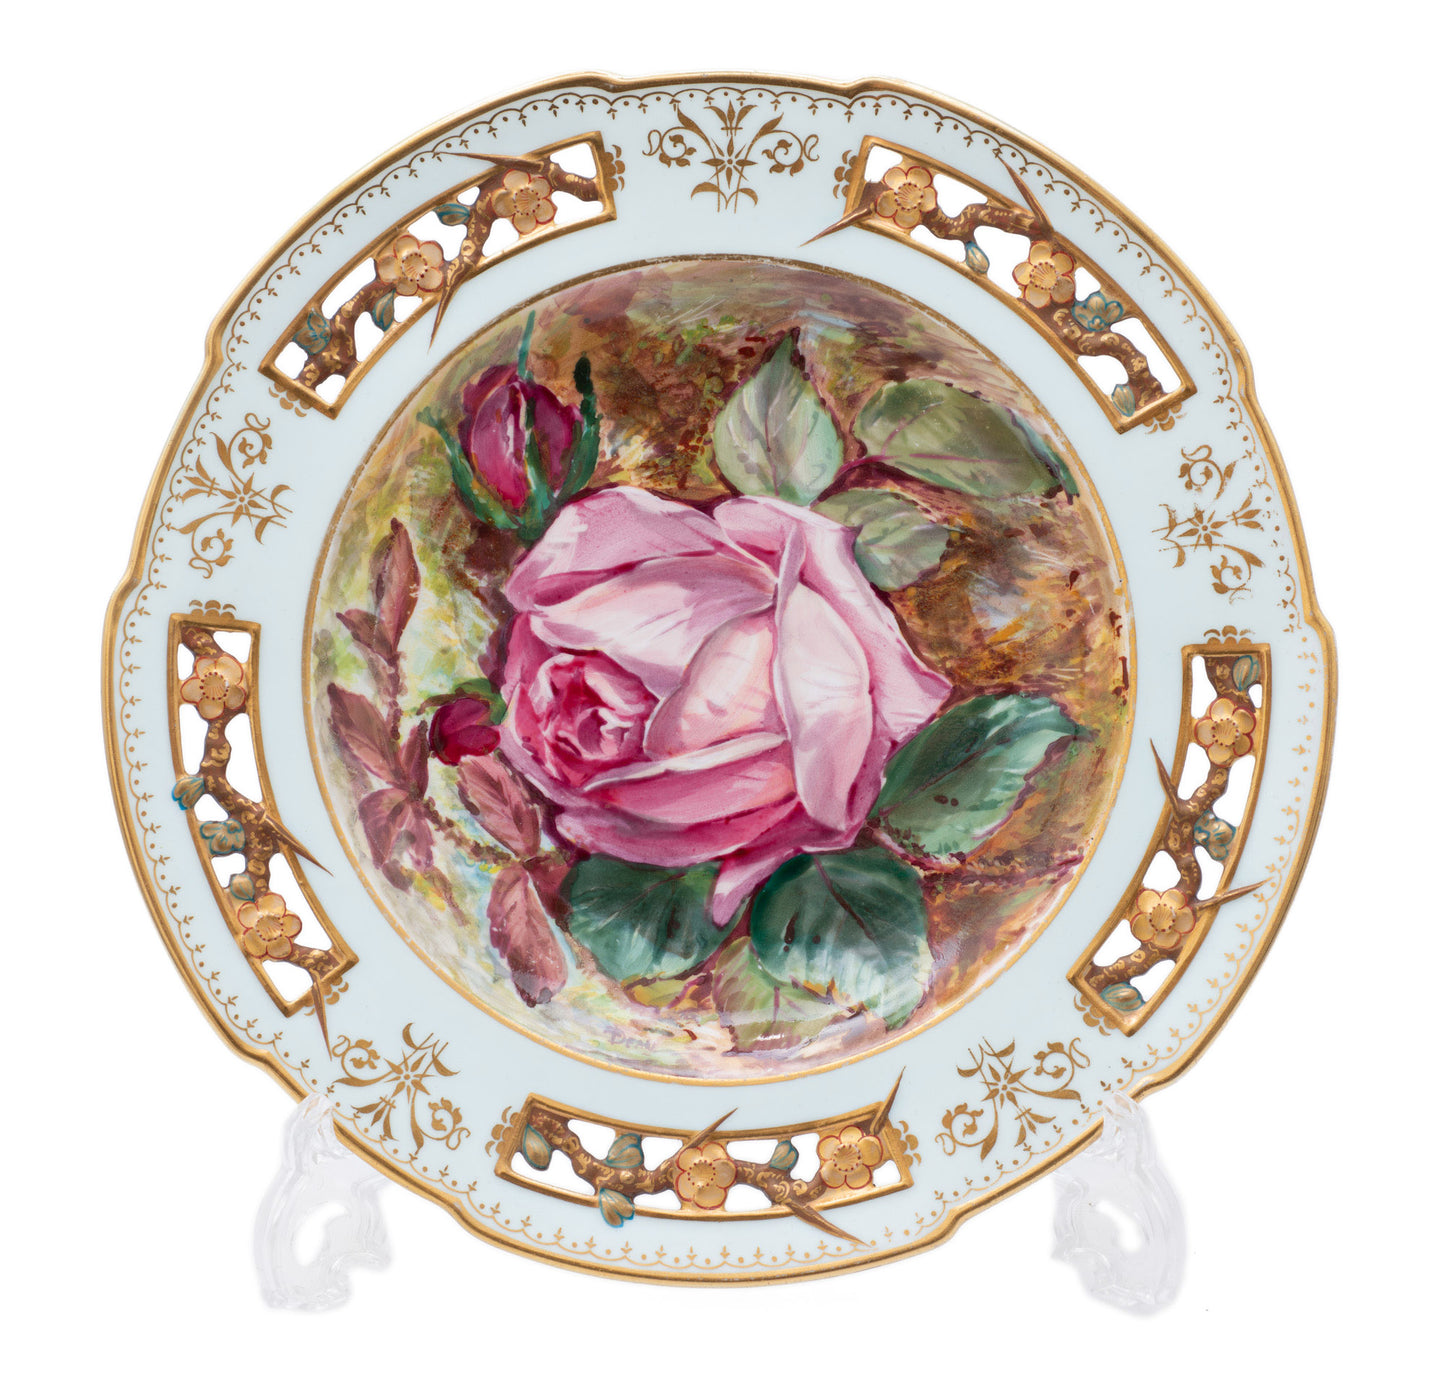 Antique Wedgwood Hand Painted & Pierced Aesthetic Plate with Rose by Dean c1880 (Code 2519)